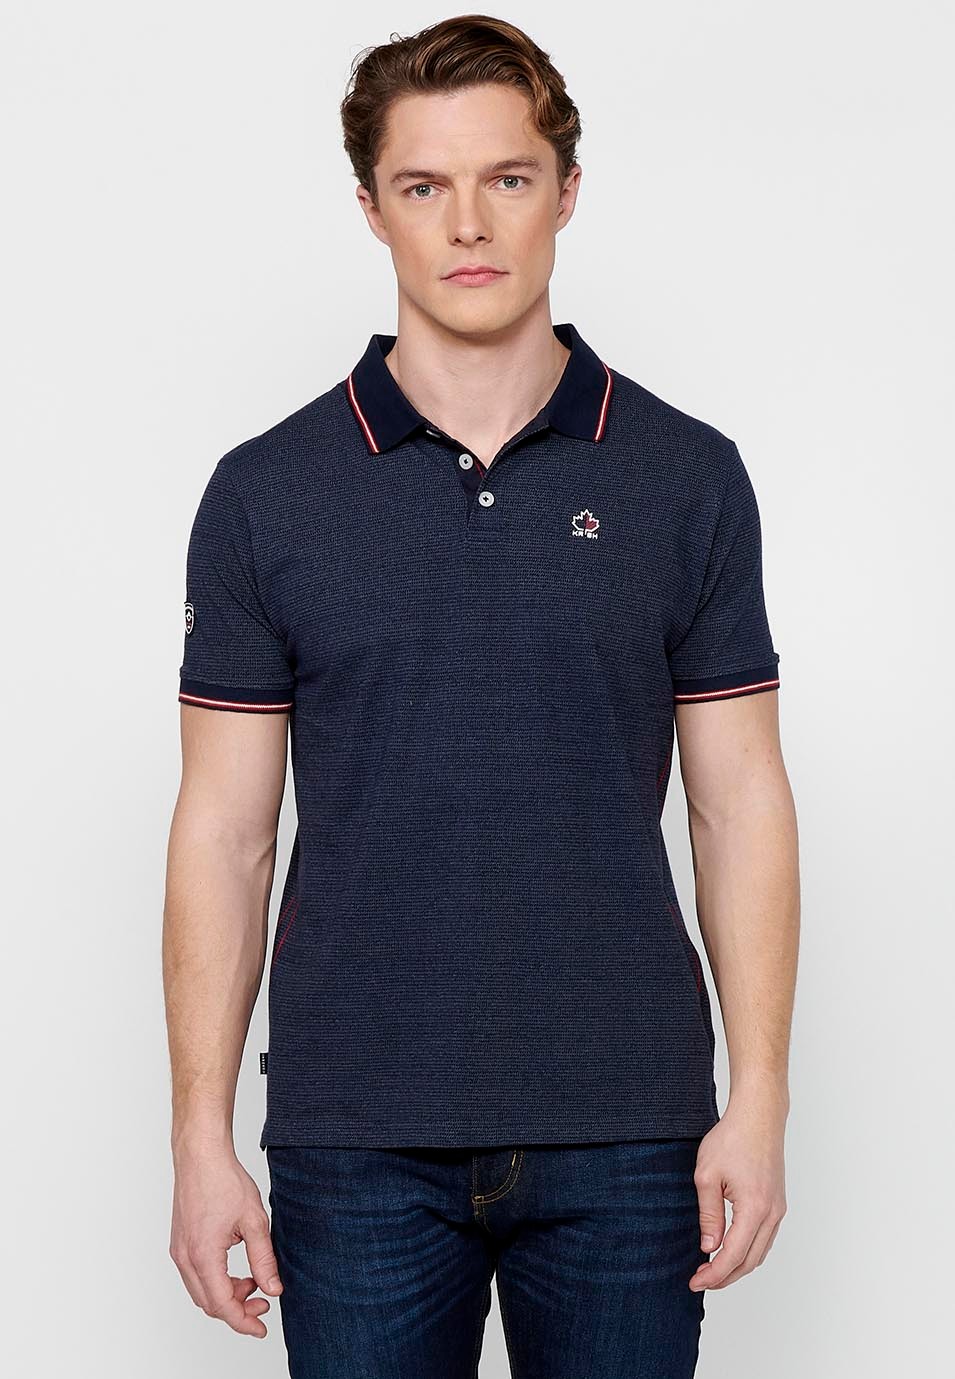 Short-sleeved polo shirt with shirt collar with buttons in Navy Color for Men 2